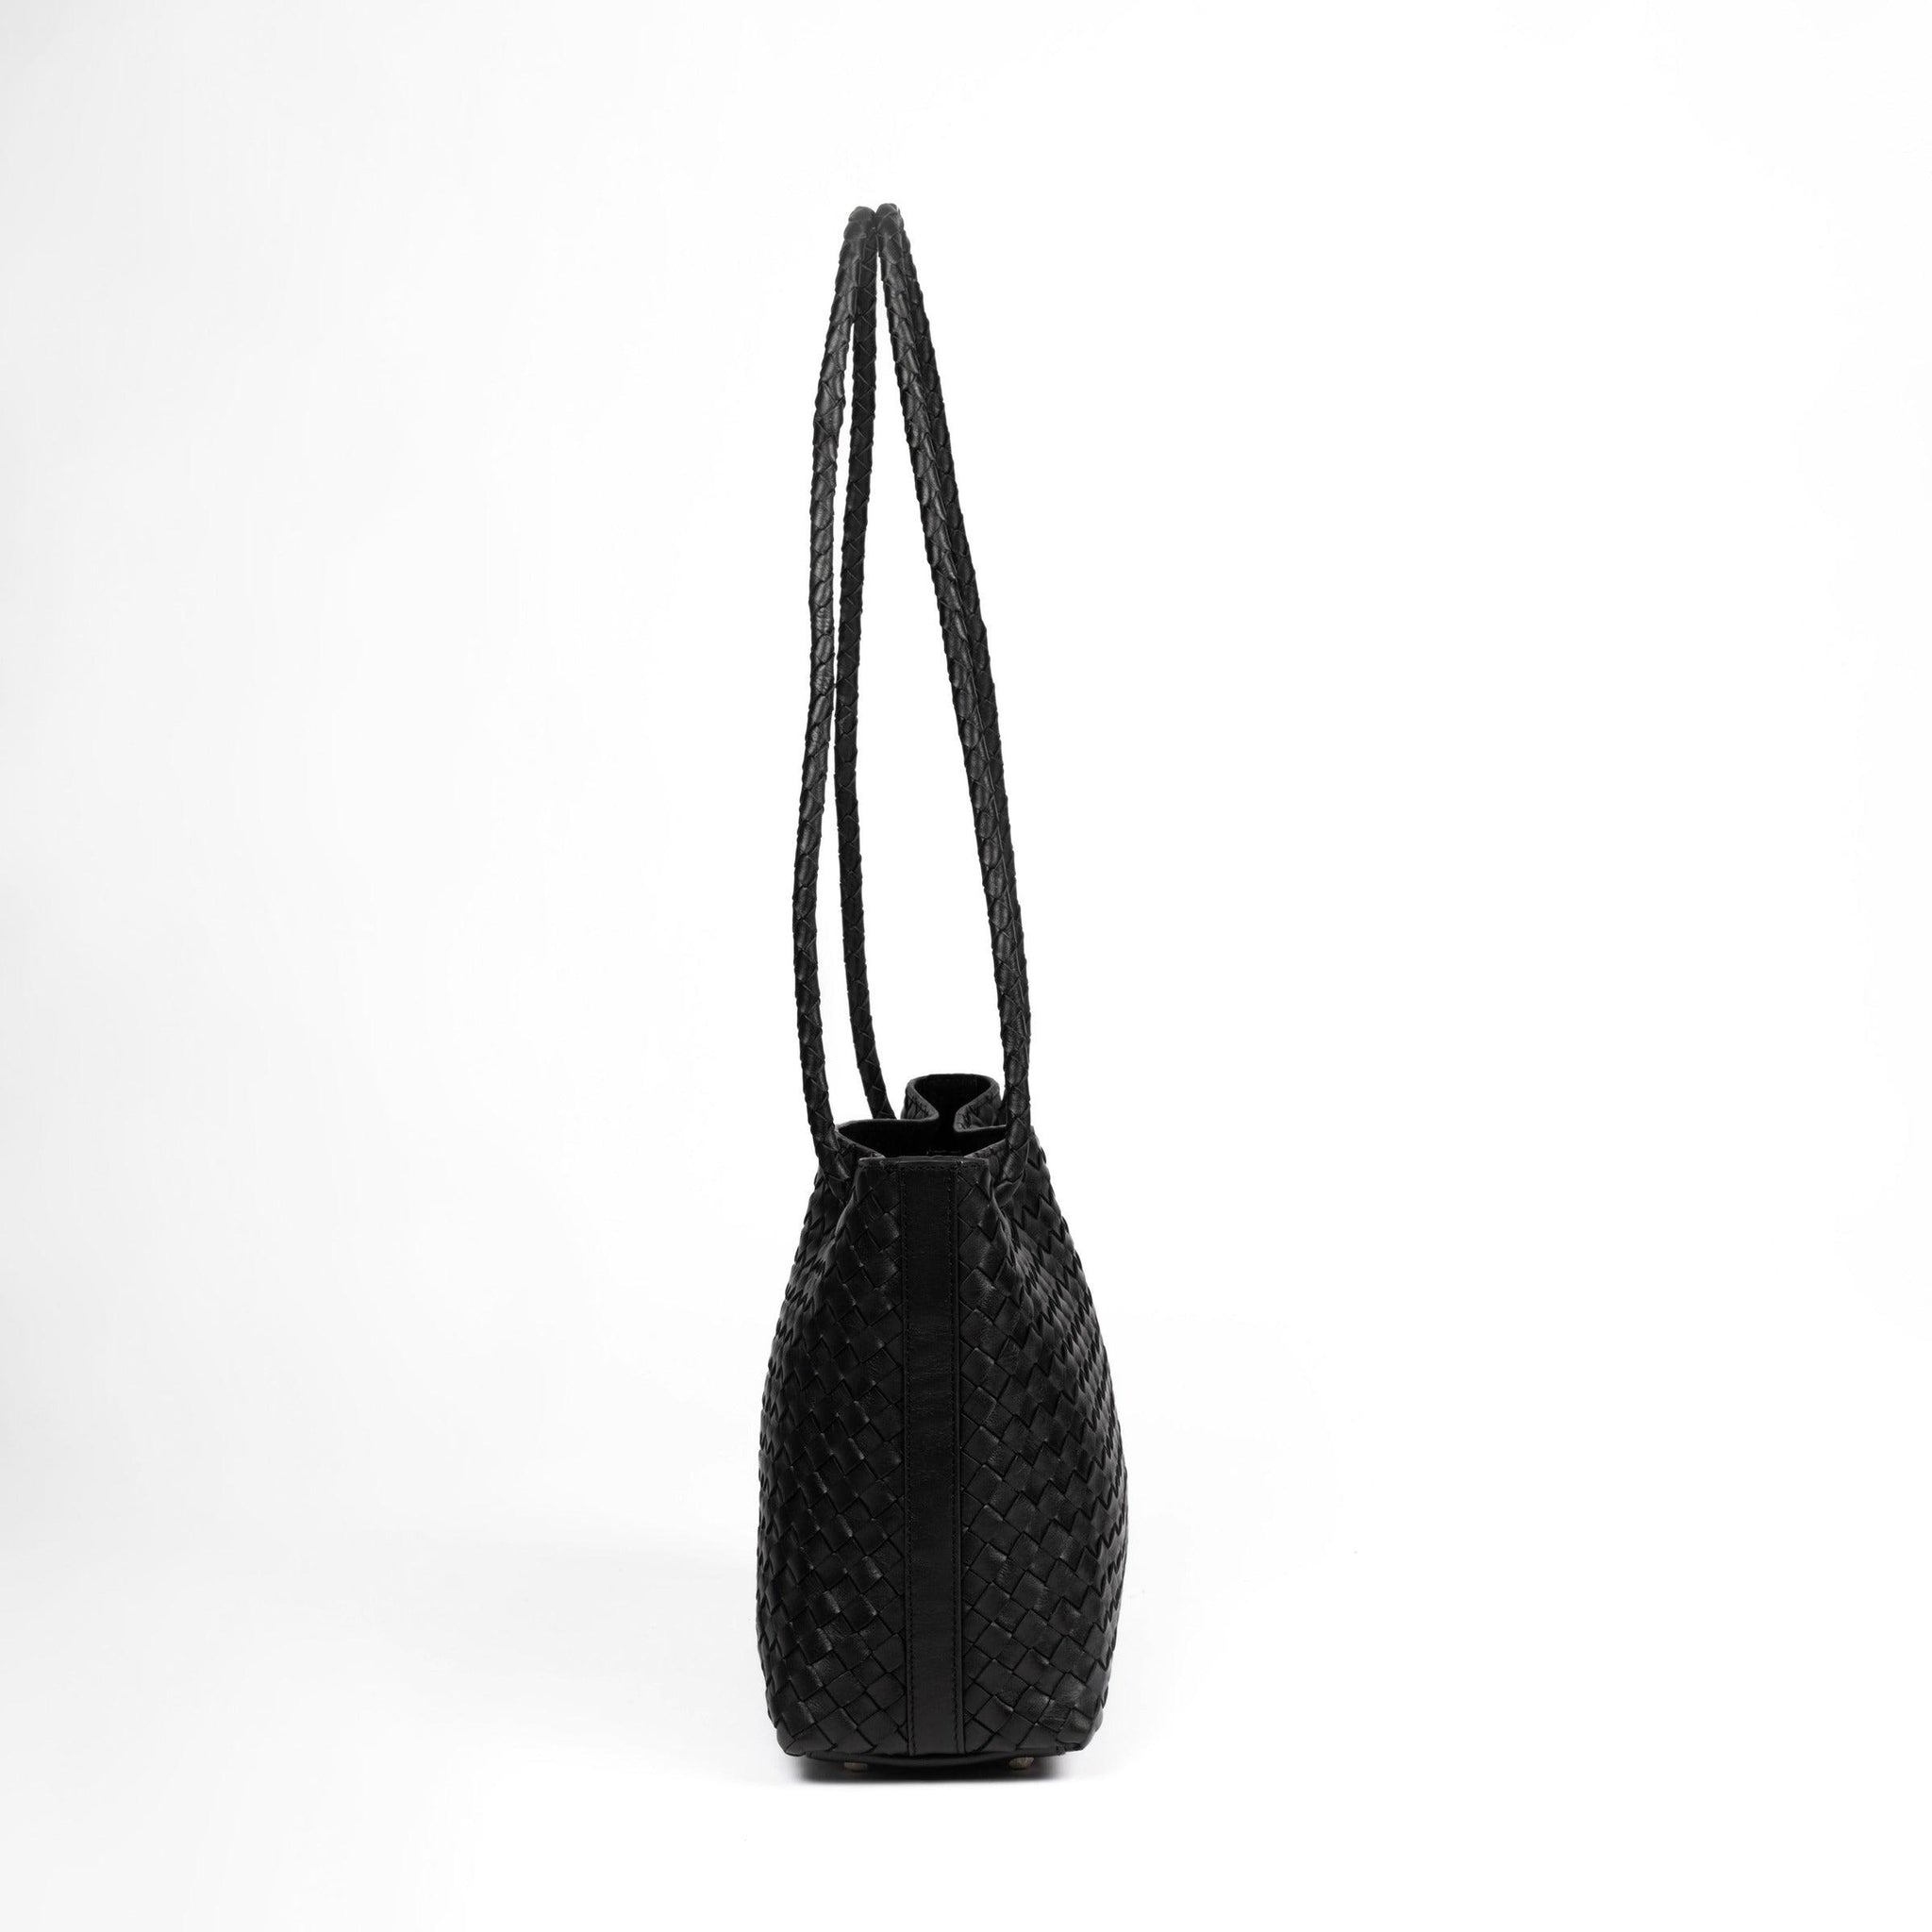 Aléo Hathern black woven tote bag - MADE THE EDIT